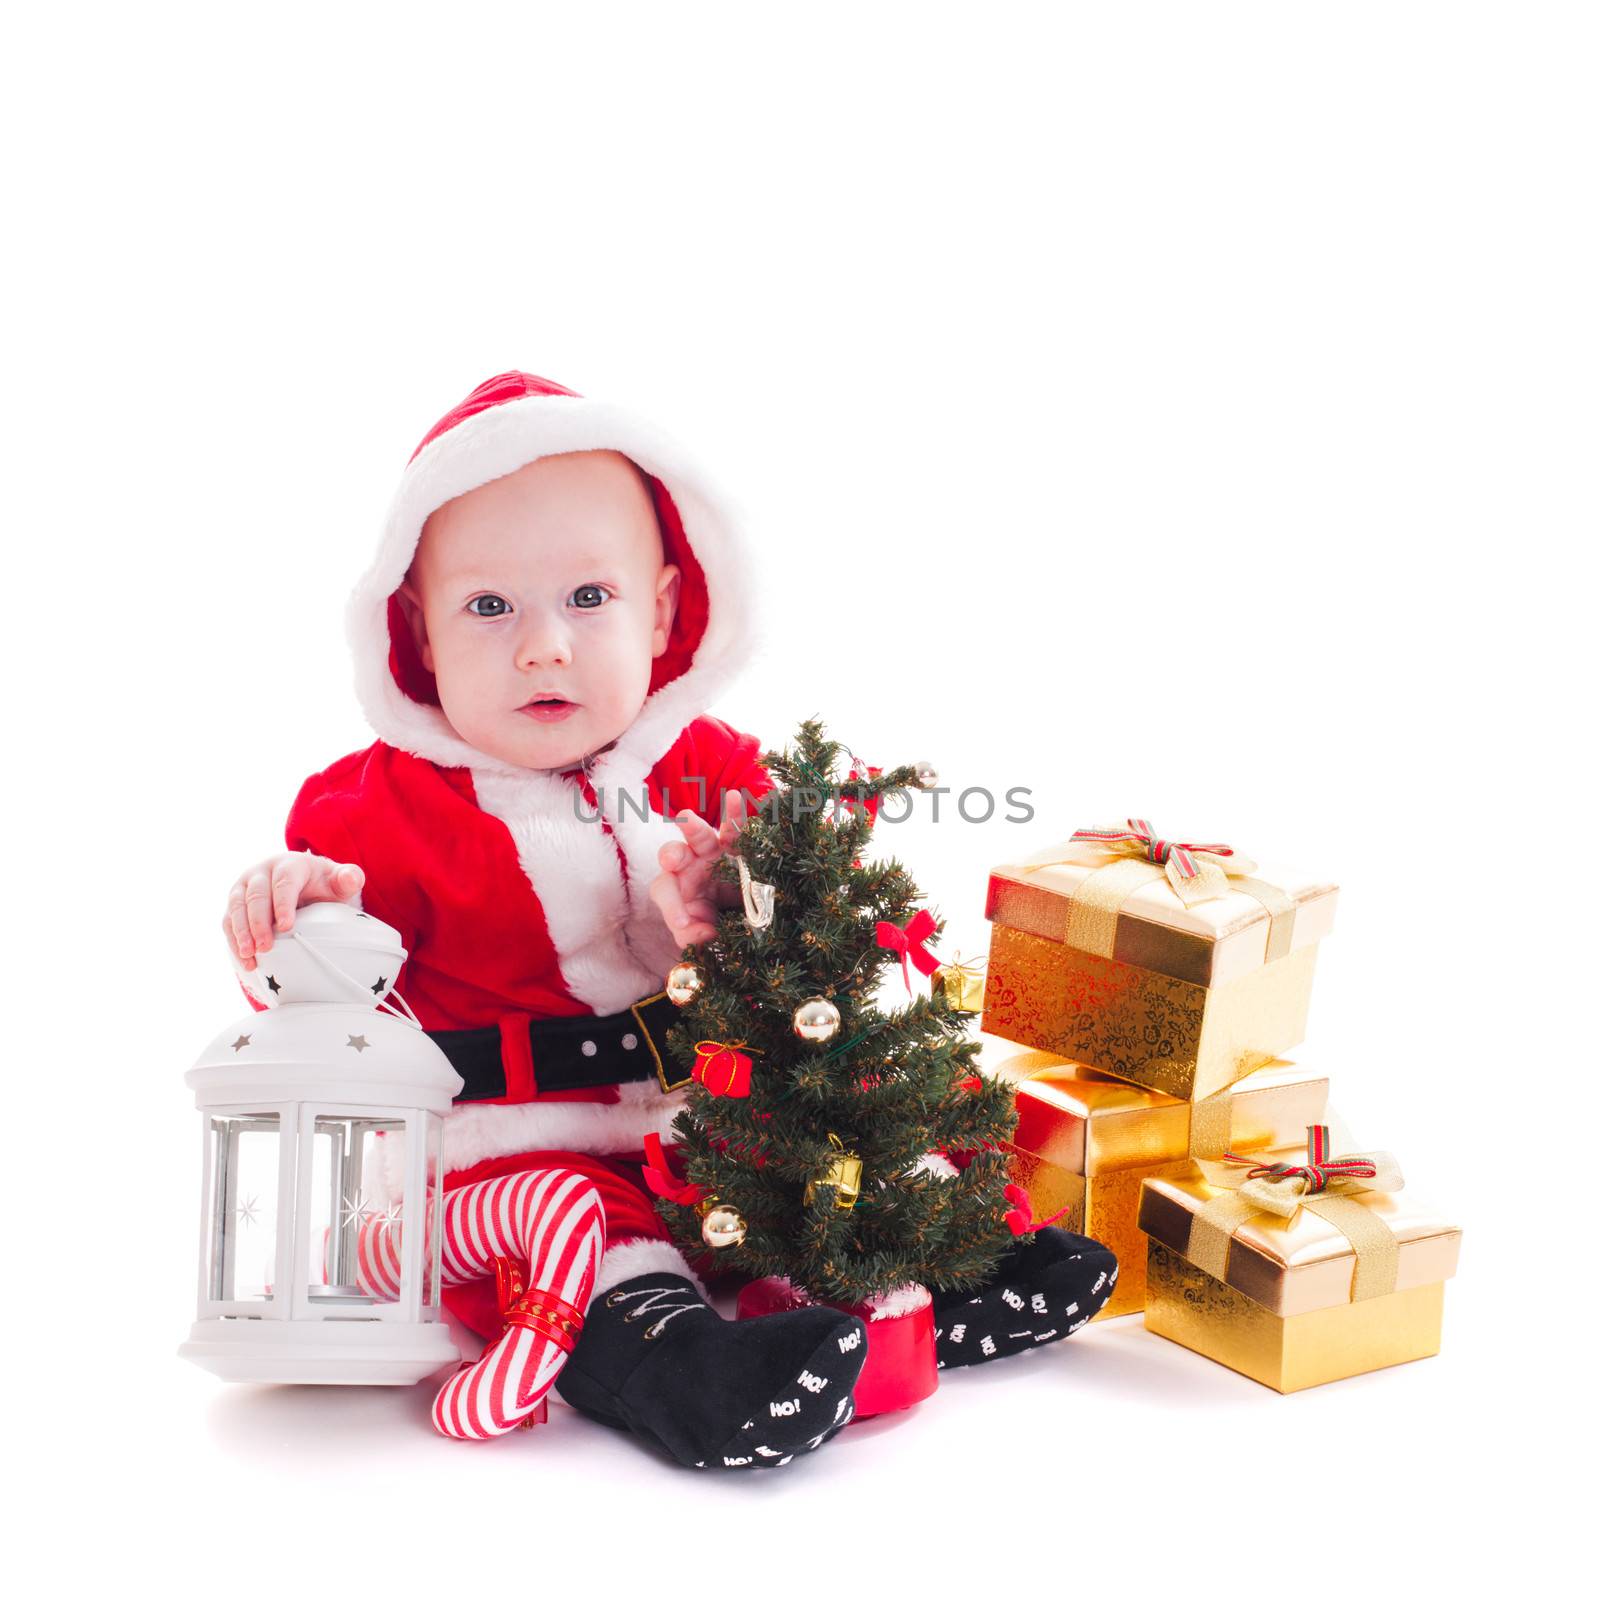 Little Santa boy with lantern, christmas tree and gift boxes isolated on white